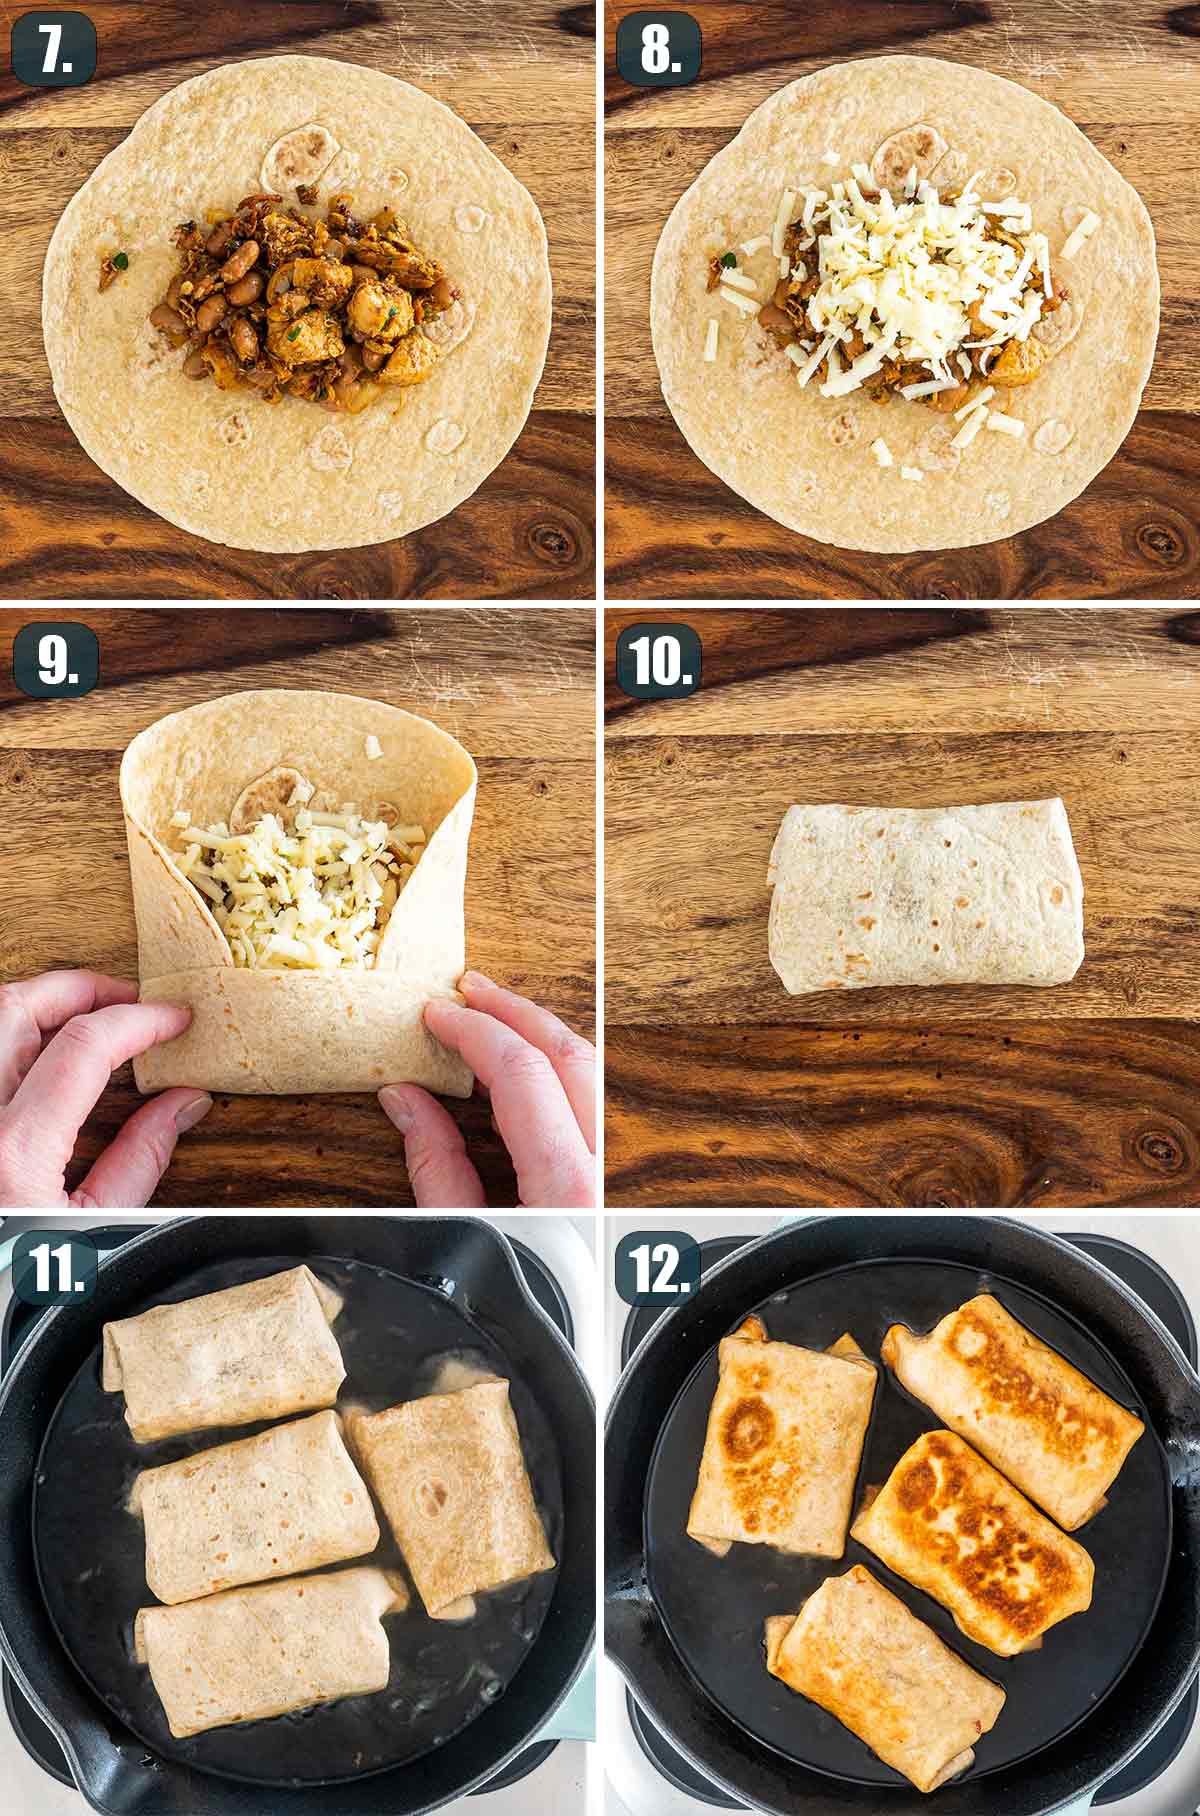 process shots showing how to fold and fry chimichangas.